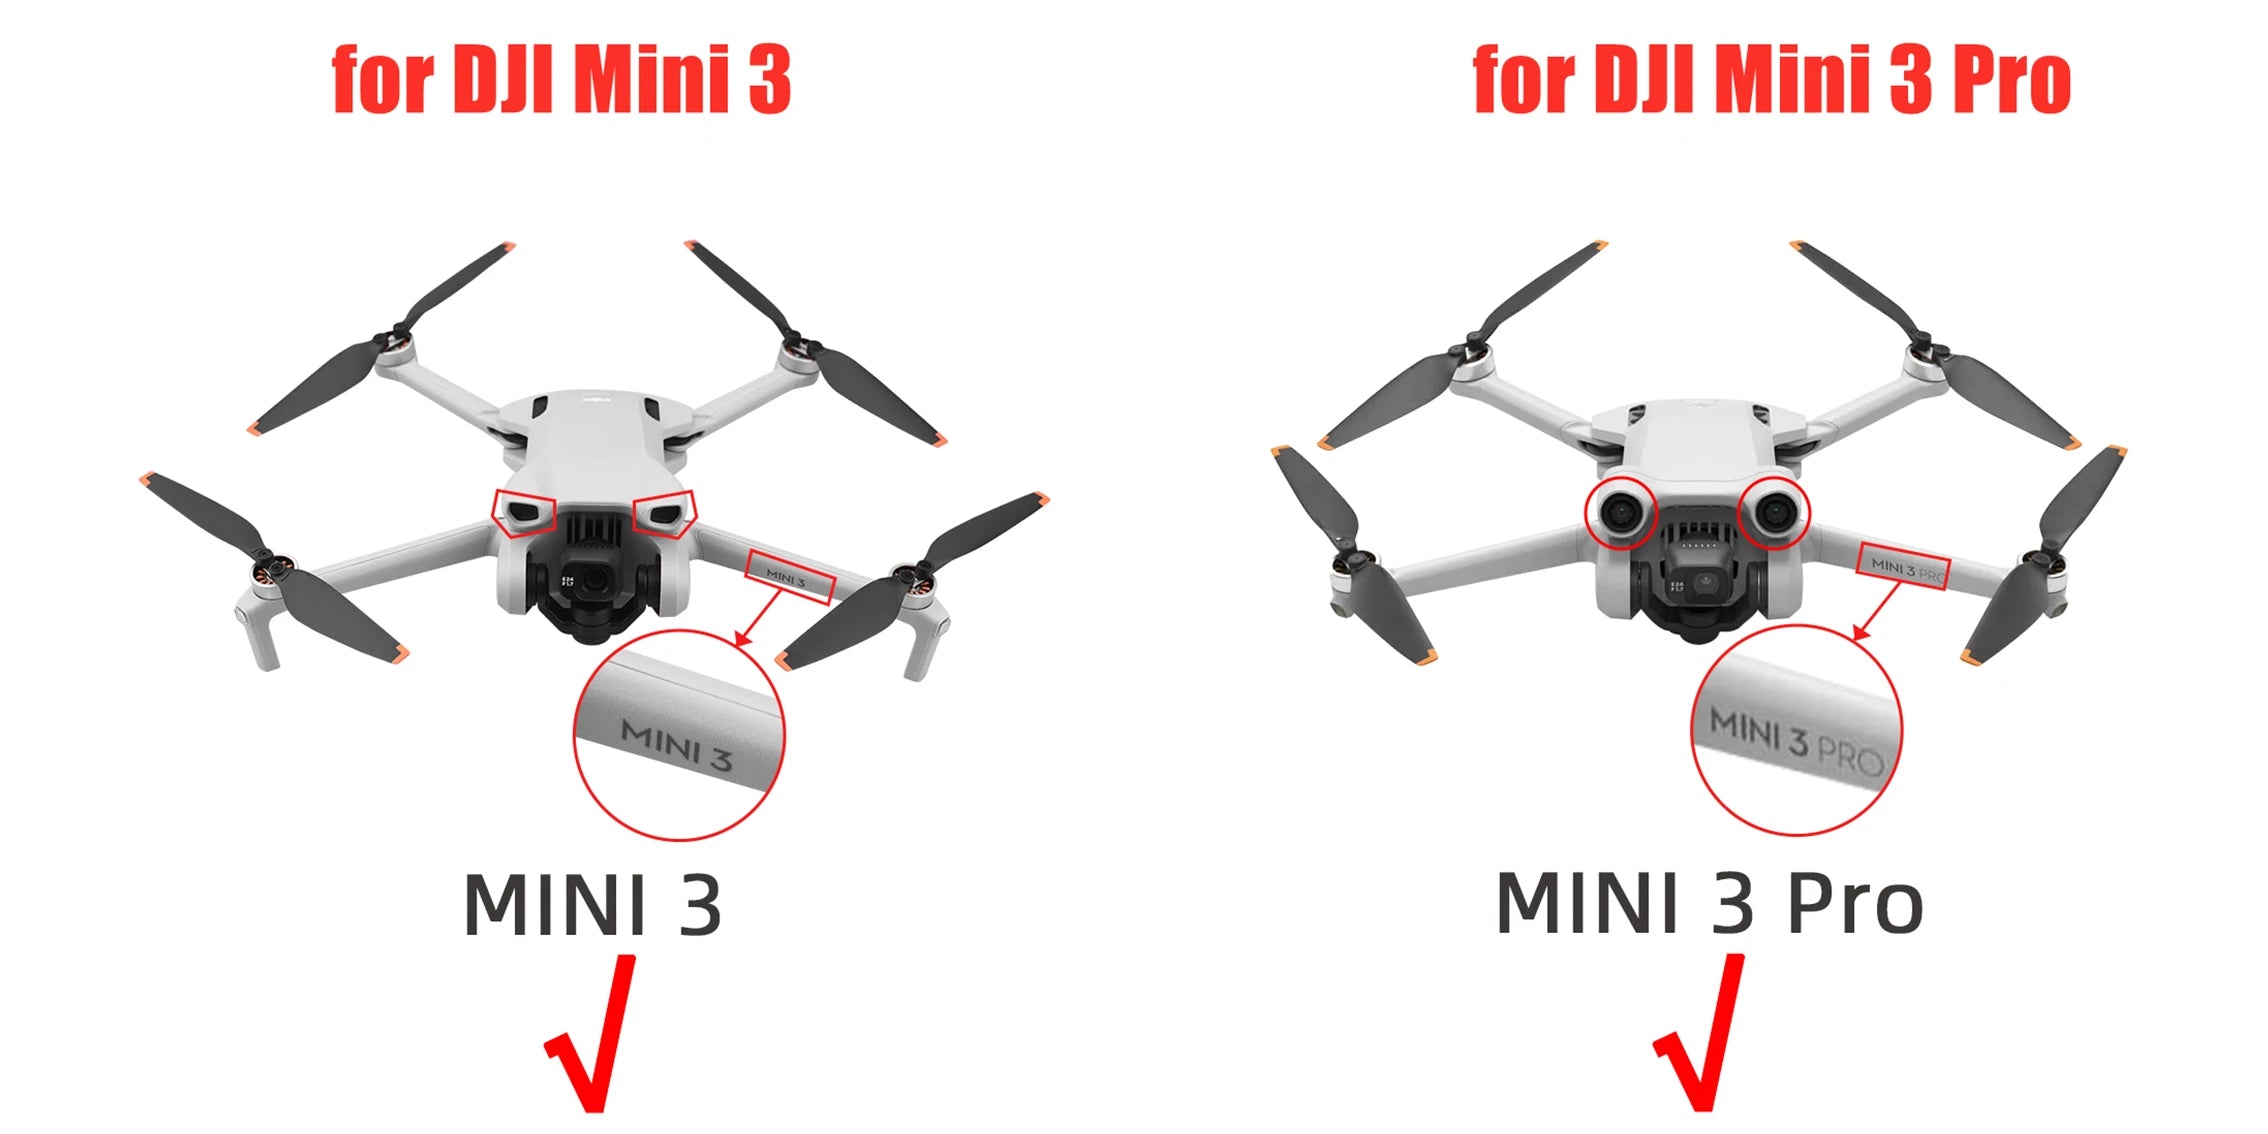 Battery Storage Bag for DJI Mini 3 Pro, please make sure you don't mind before ordering .